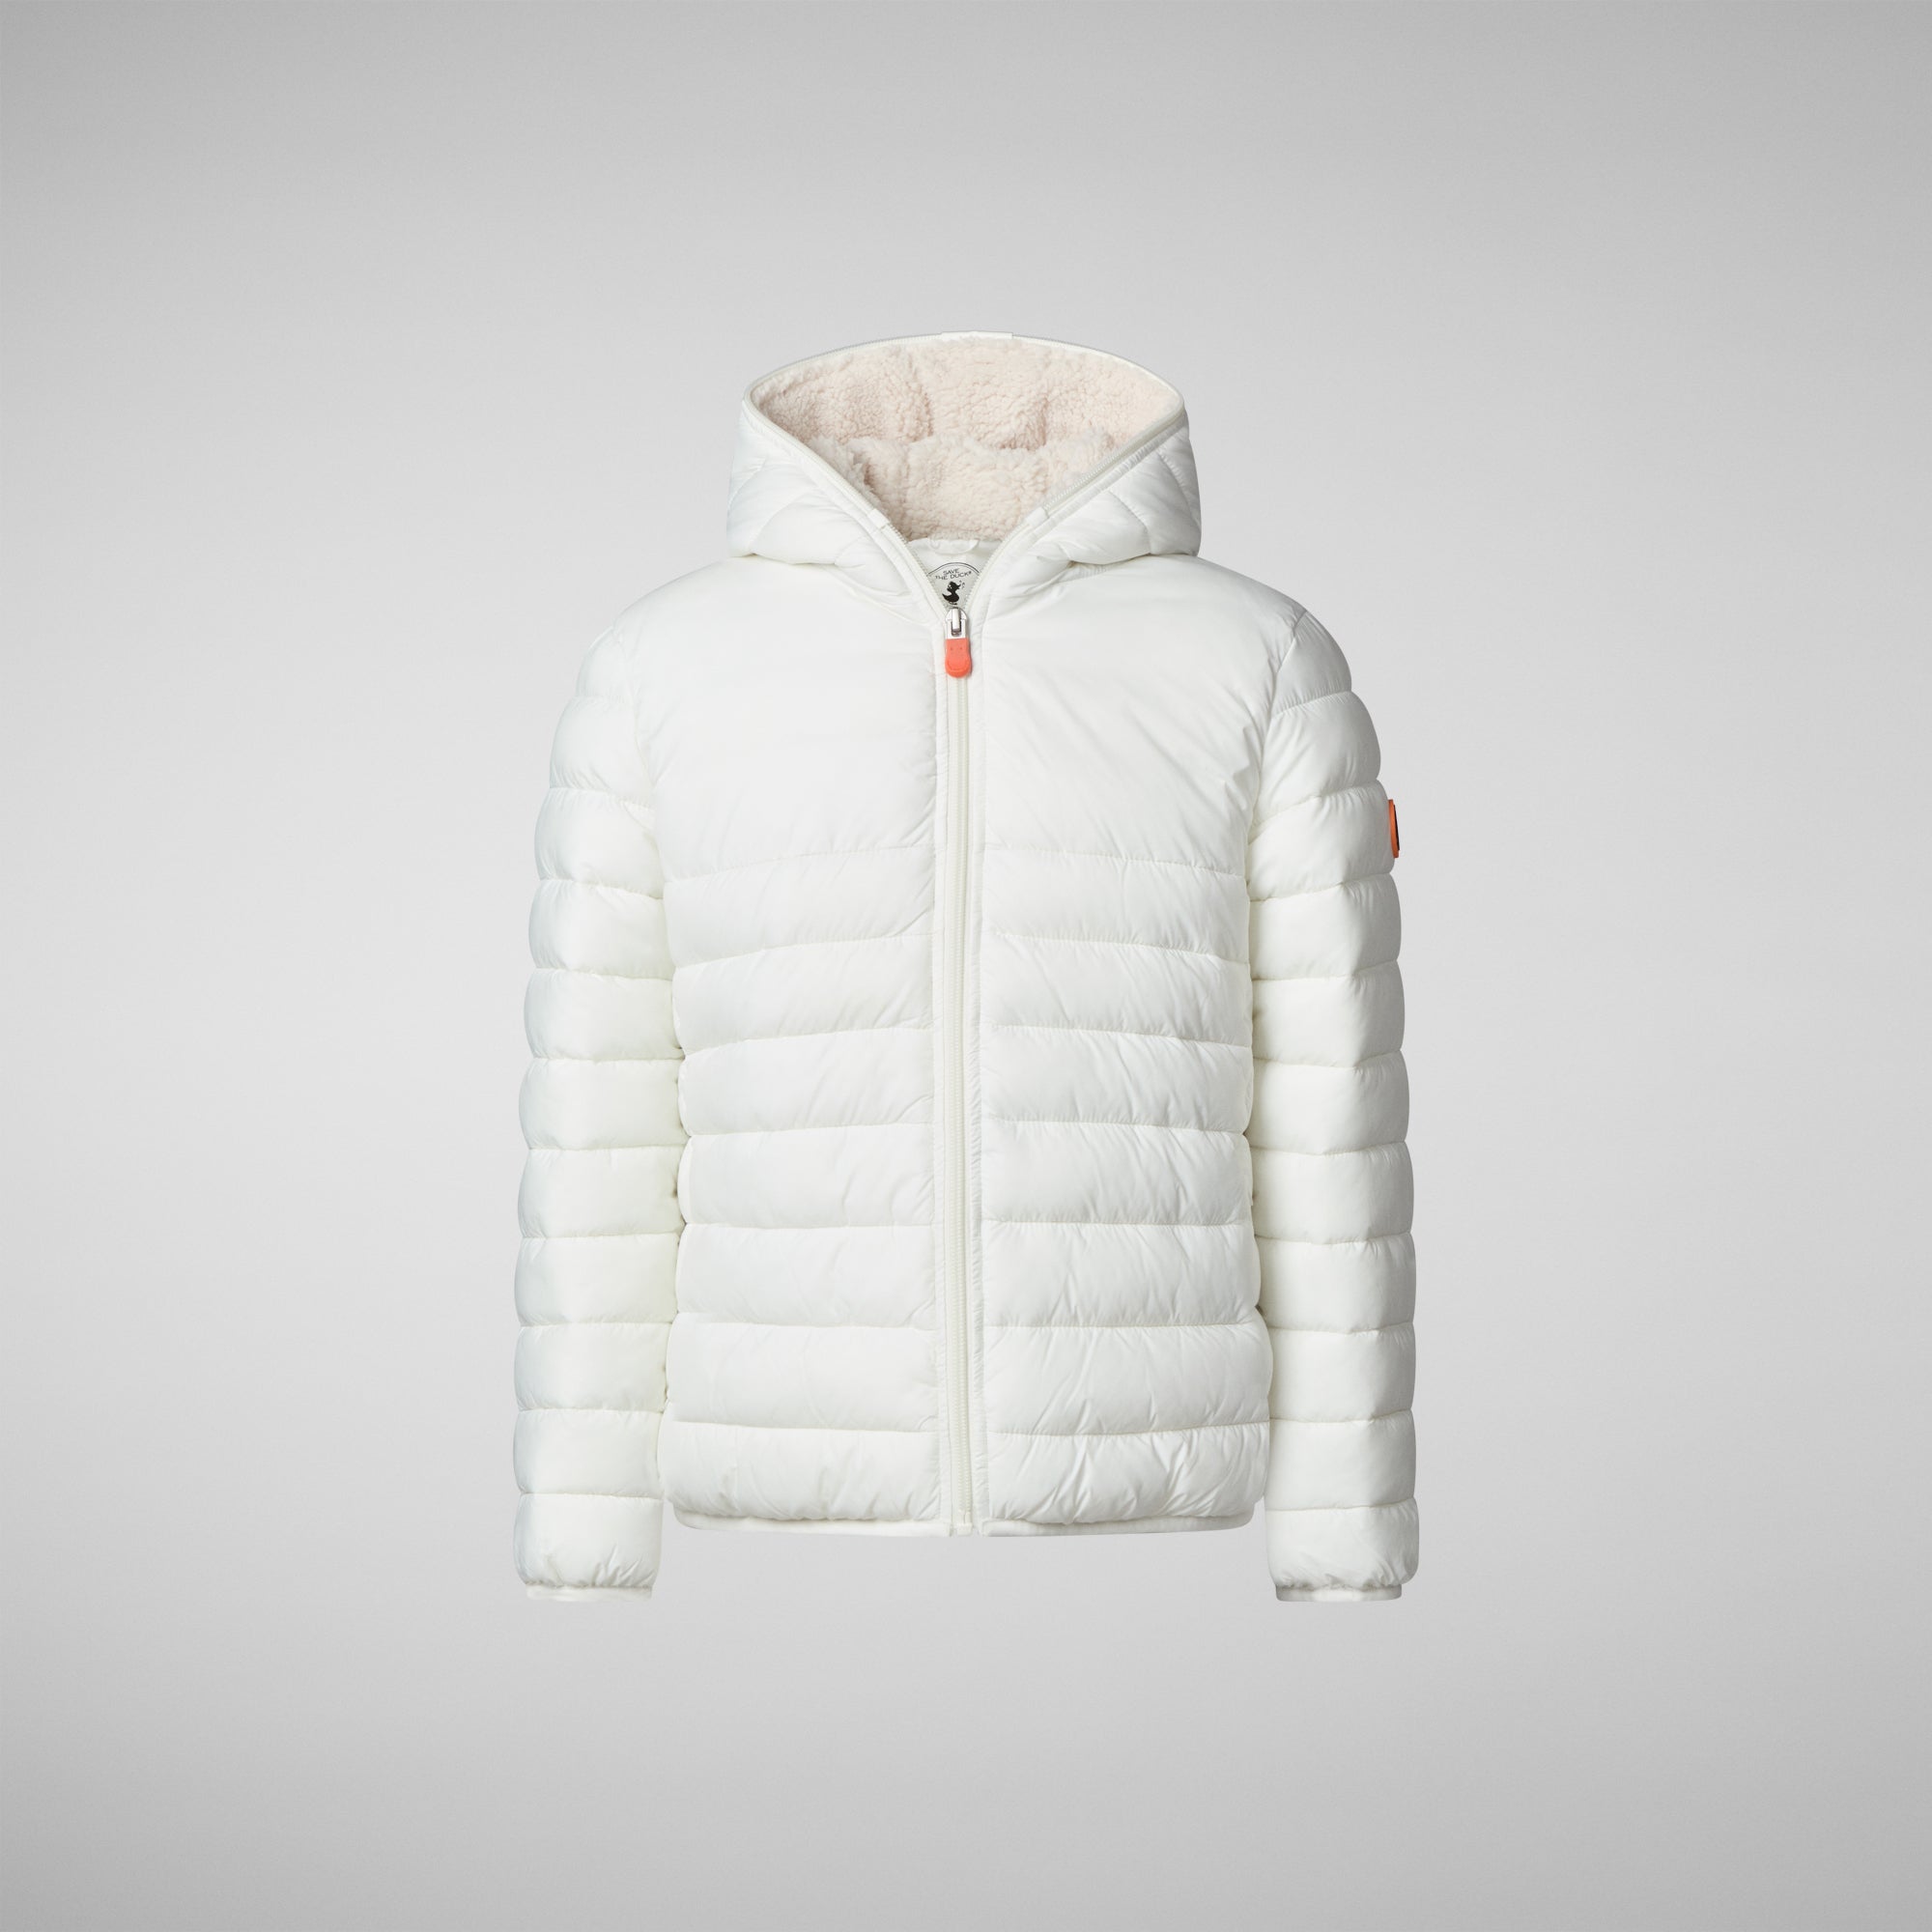 Girls' animal free hooded puffer jacket Leci in off-white - Save